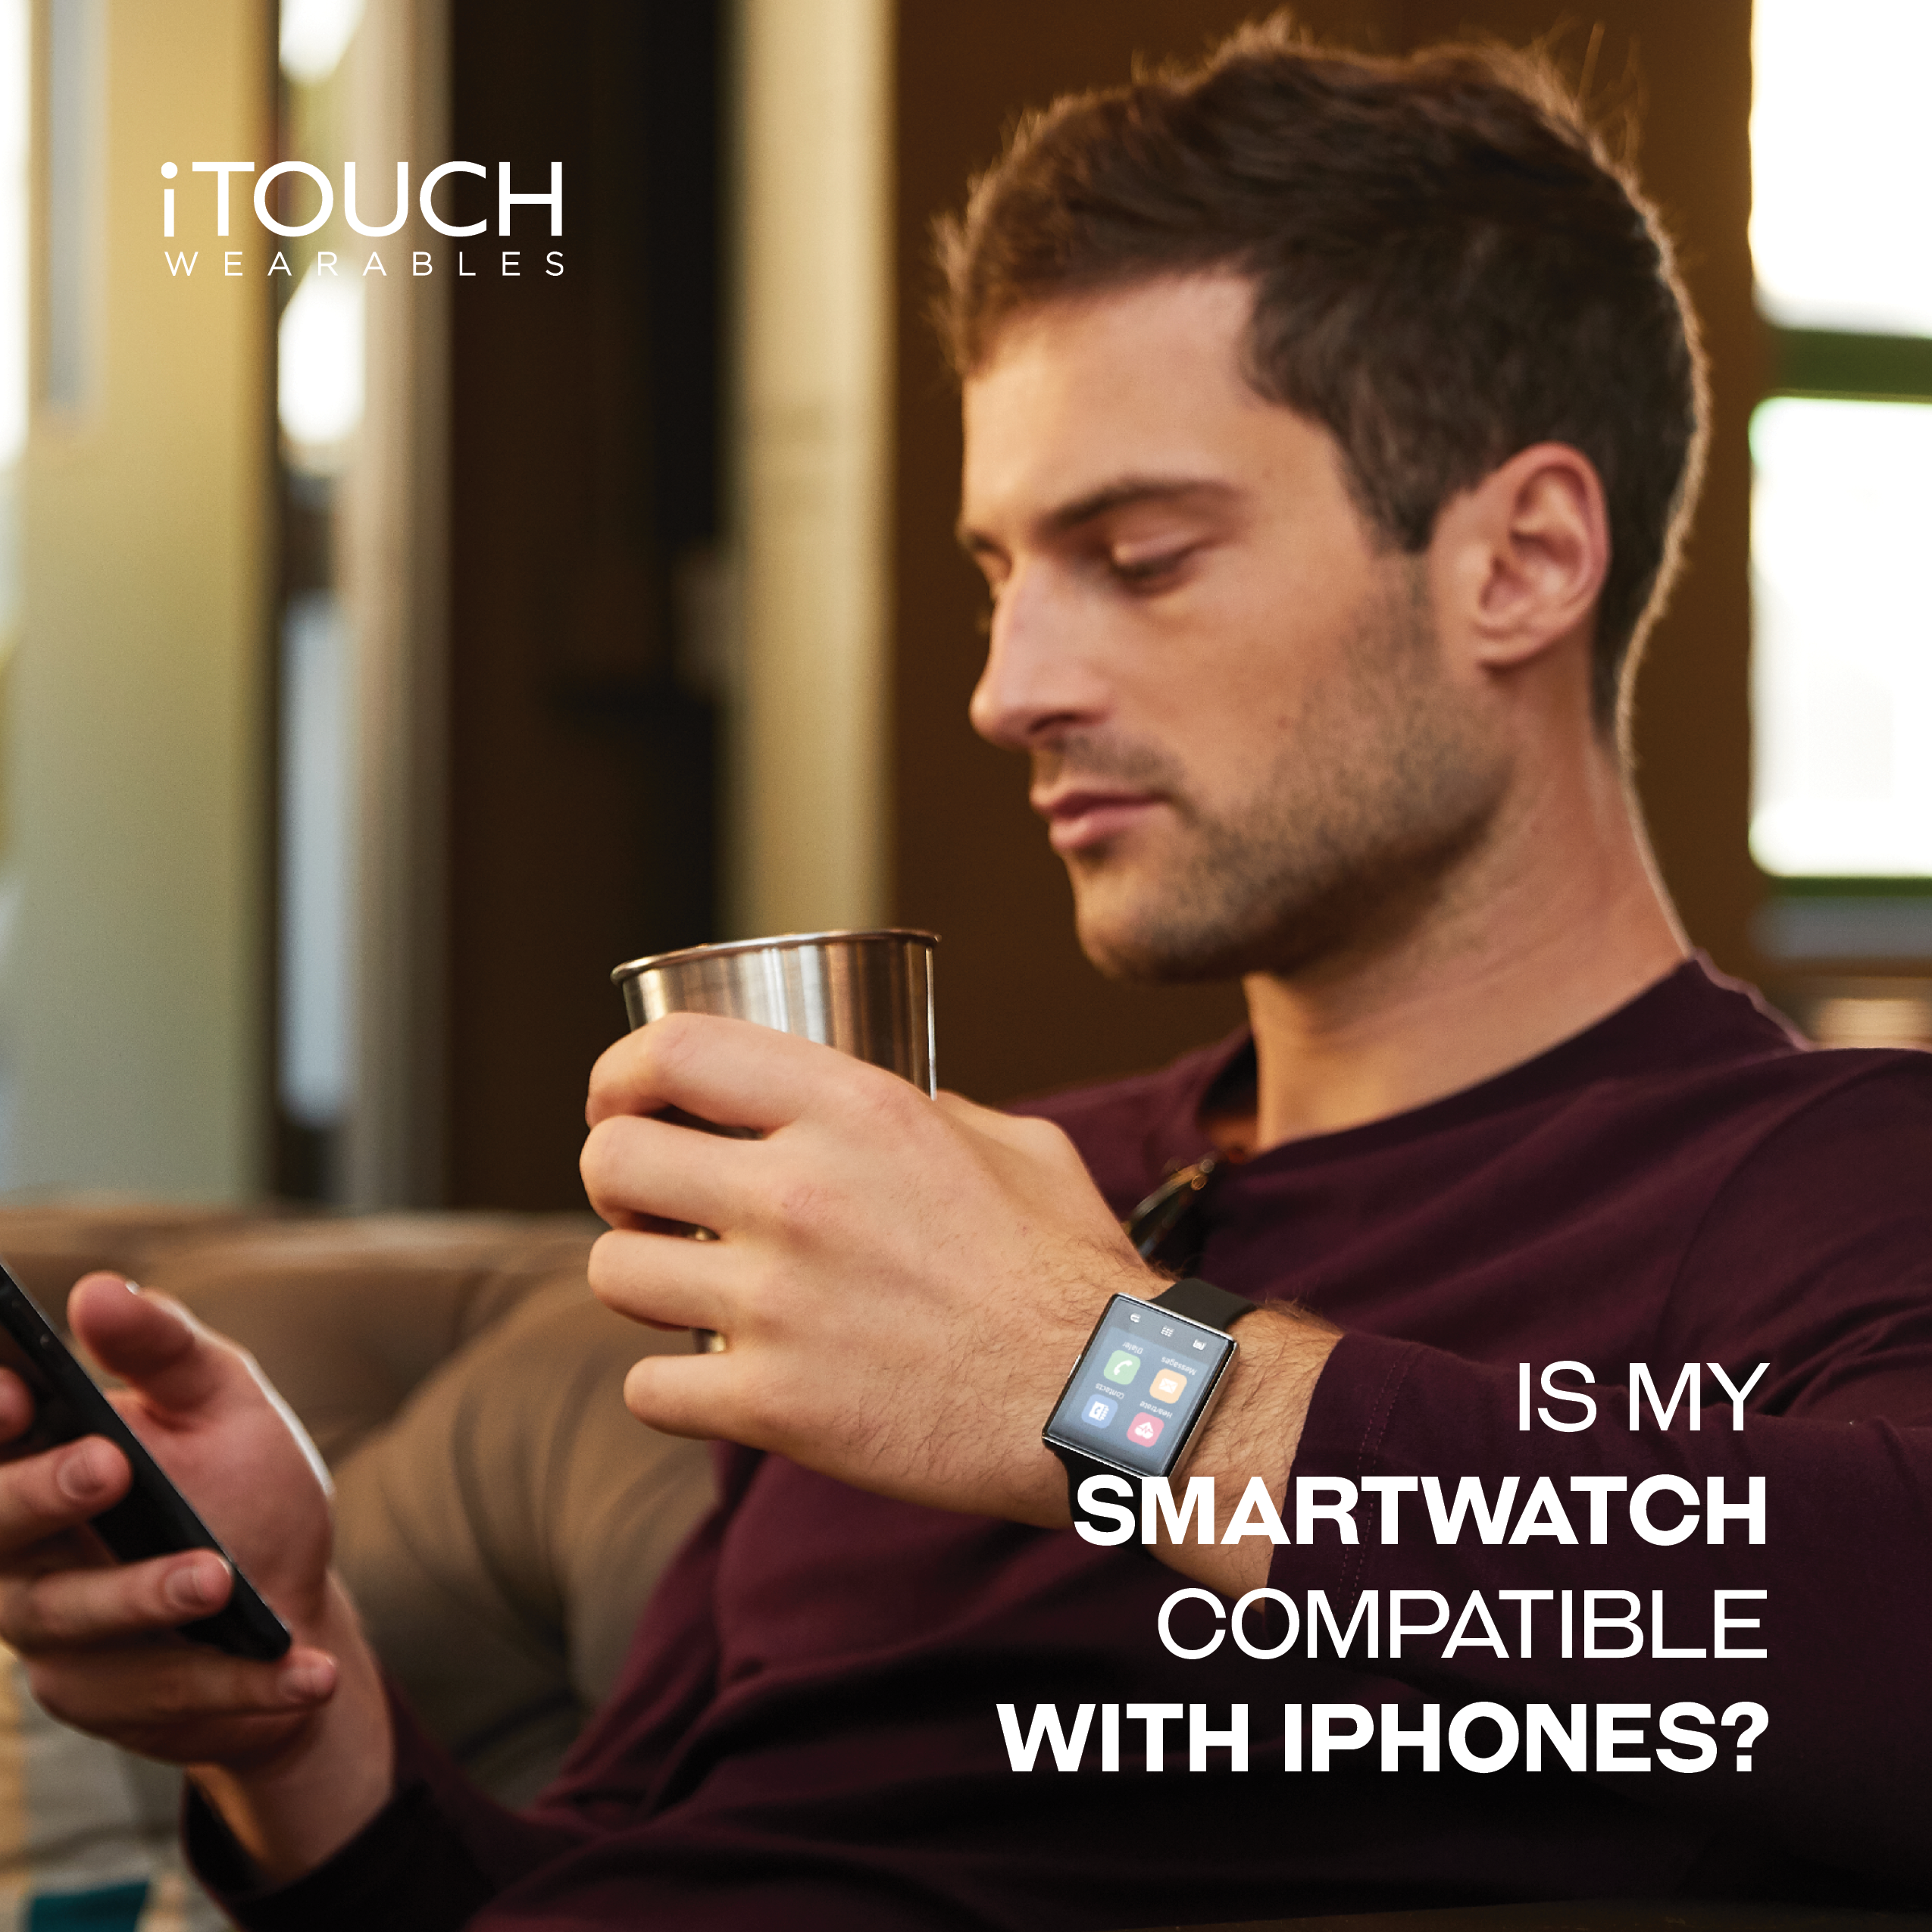 Is My Smartwatch Compatible With iPhones?